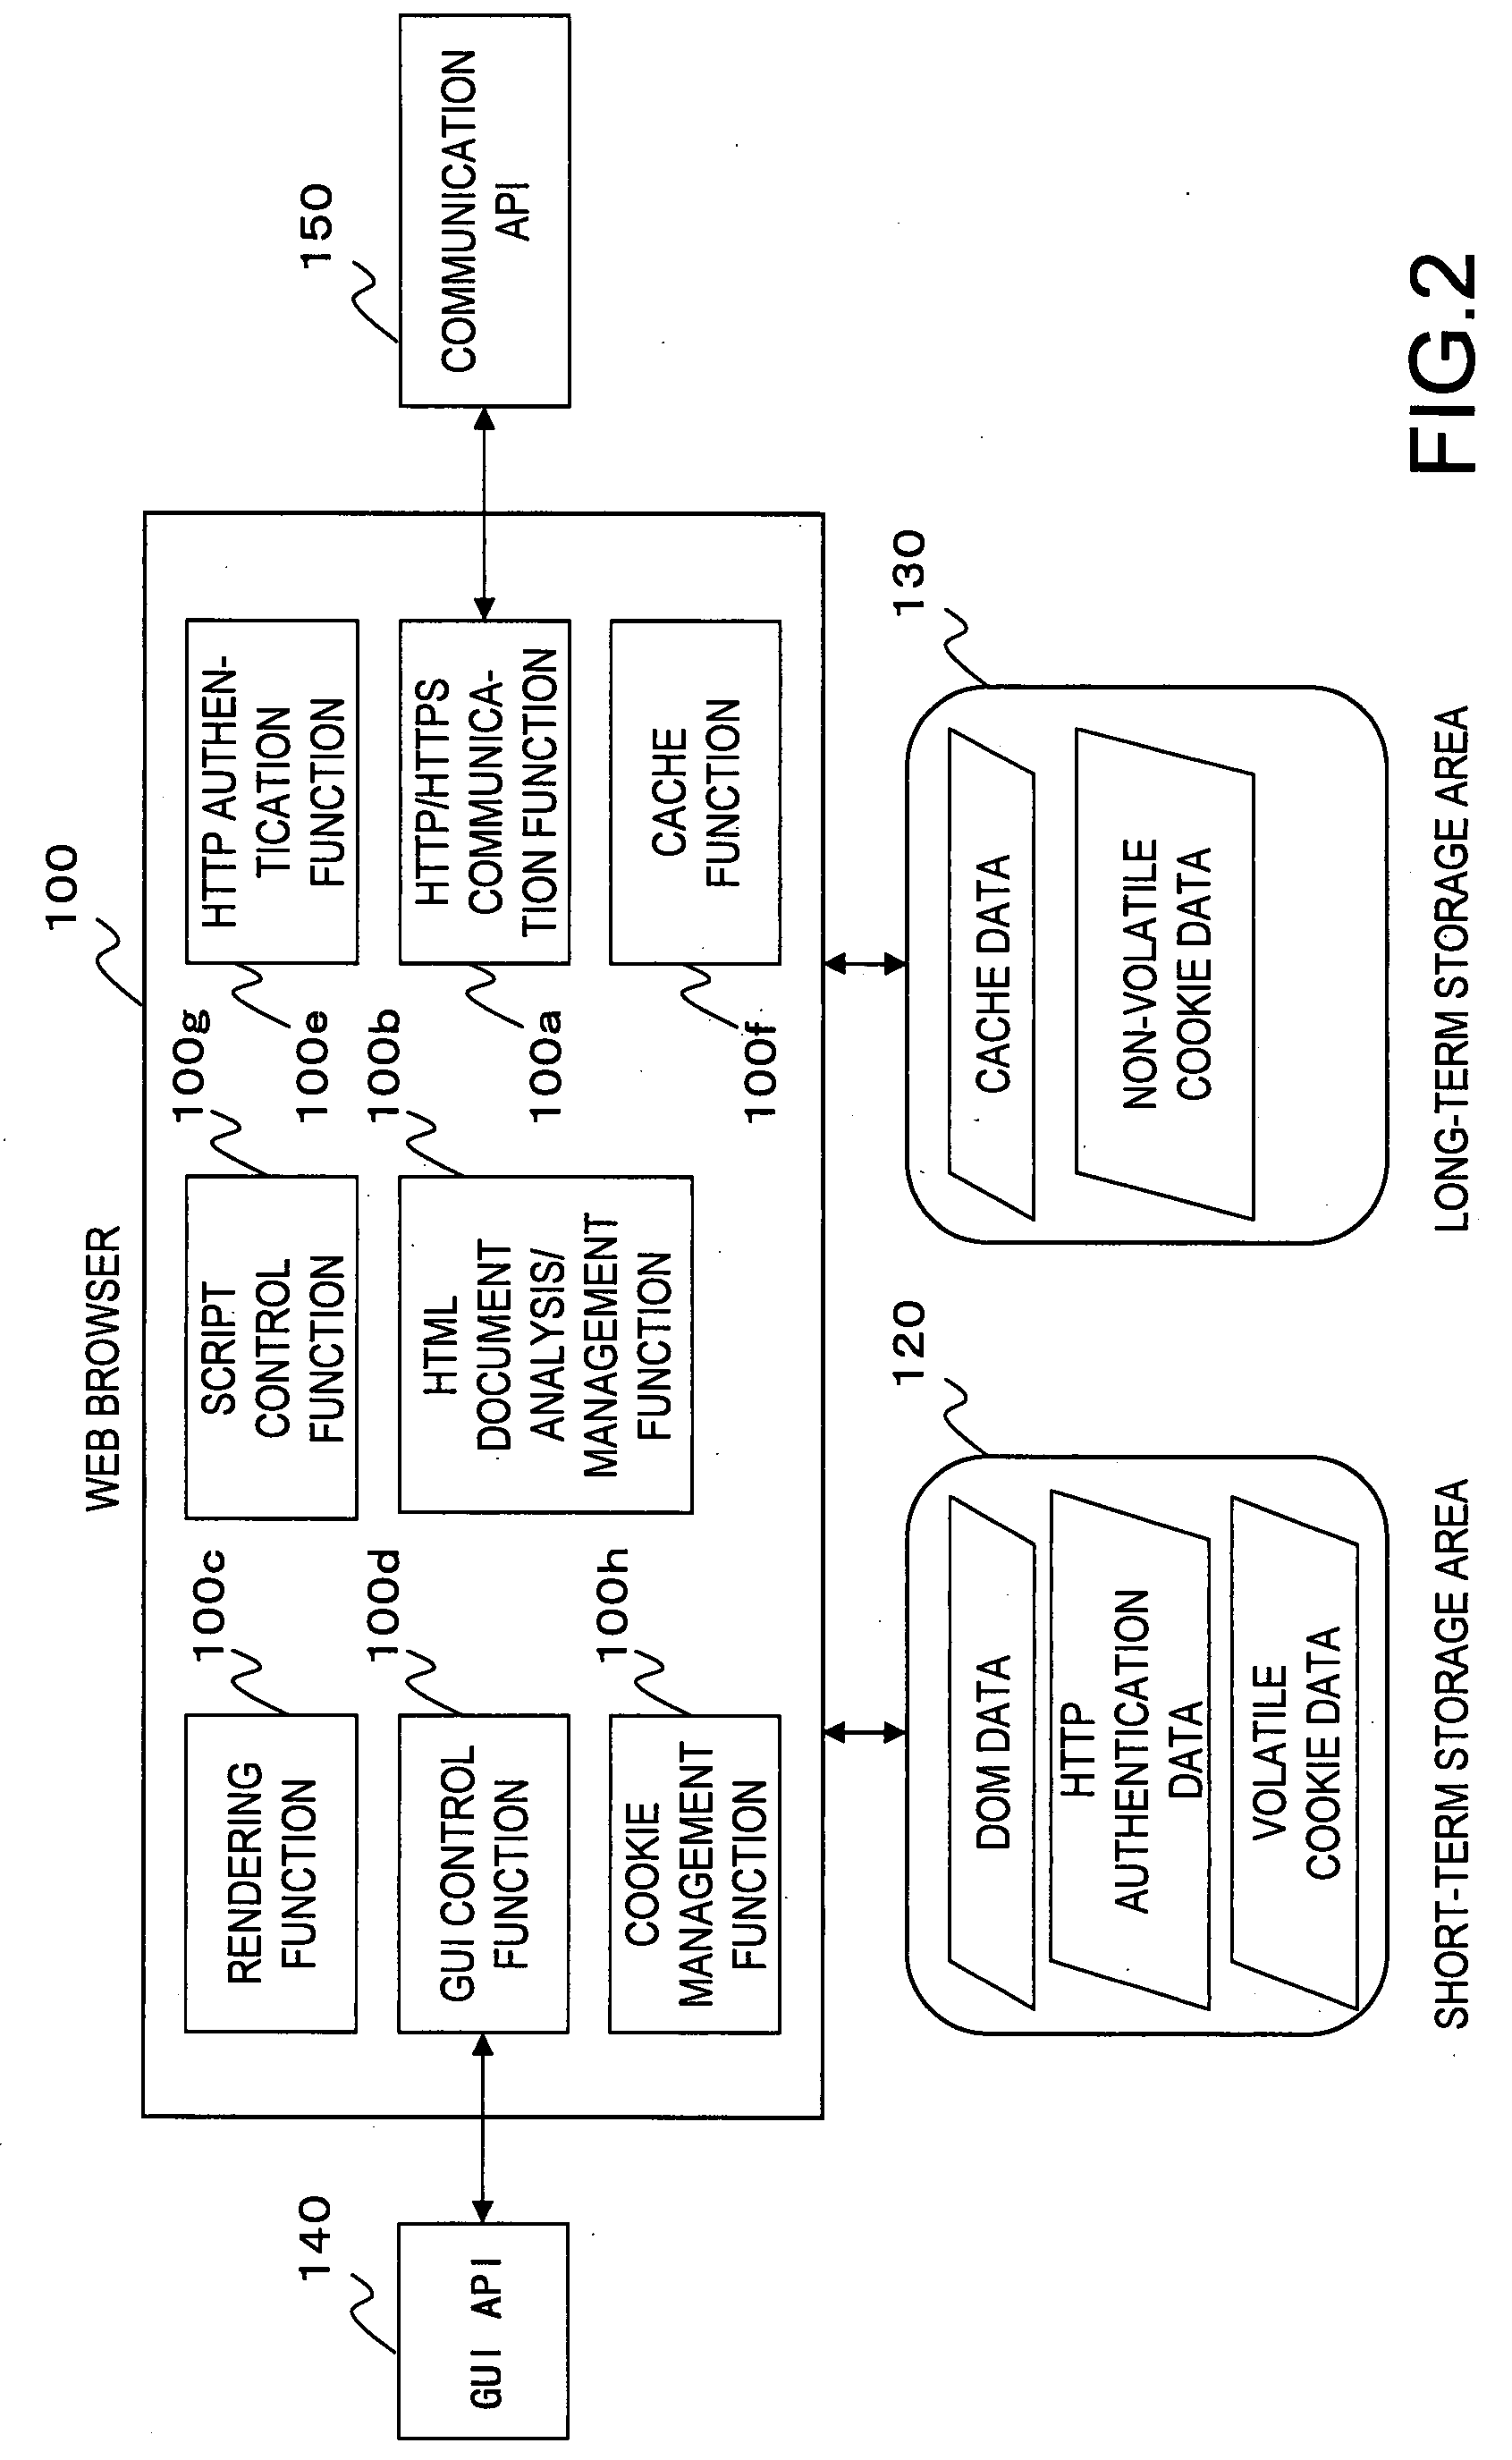 Request transmission control apparatus and method